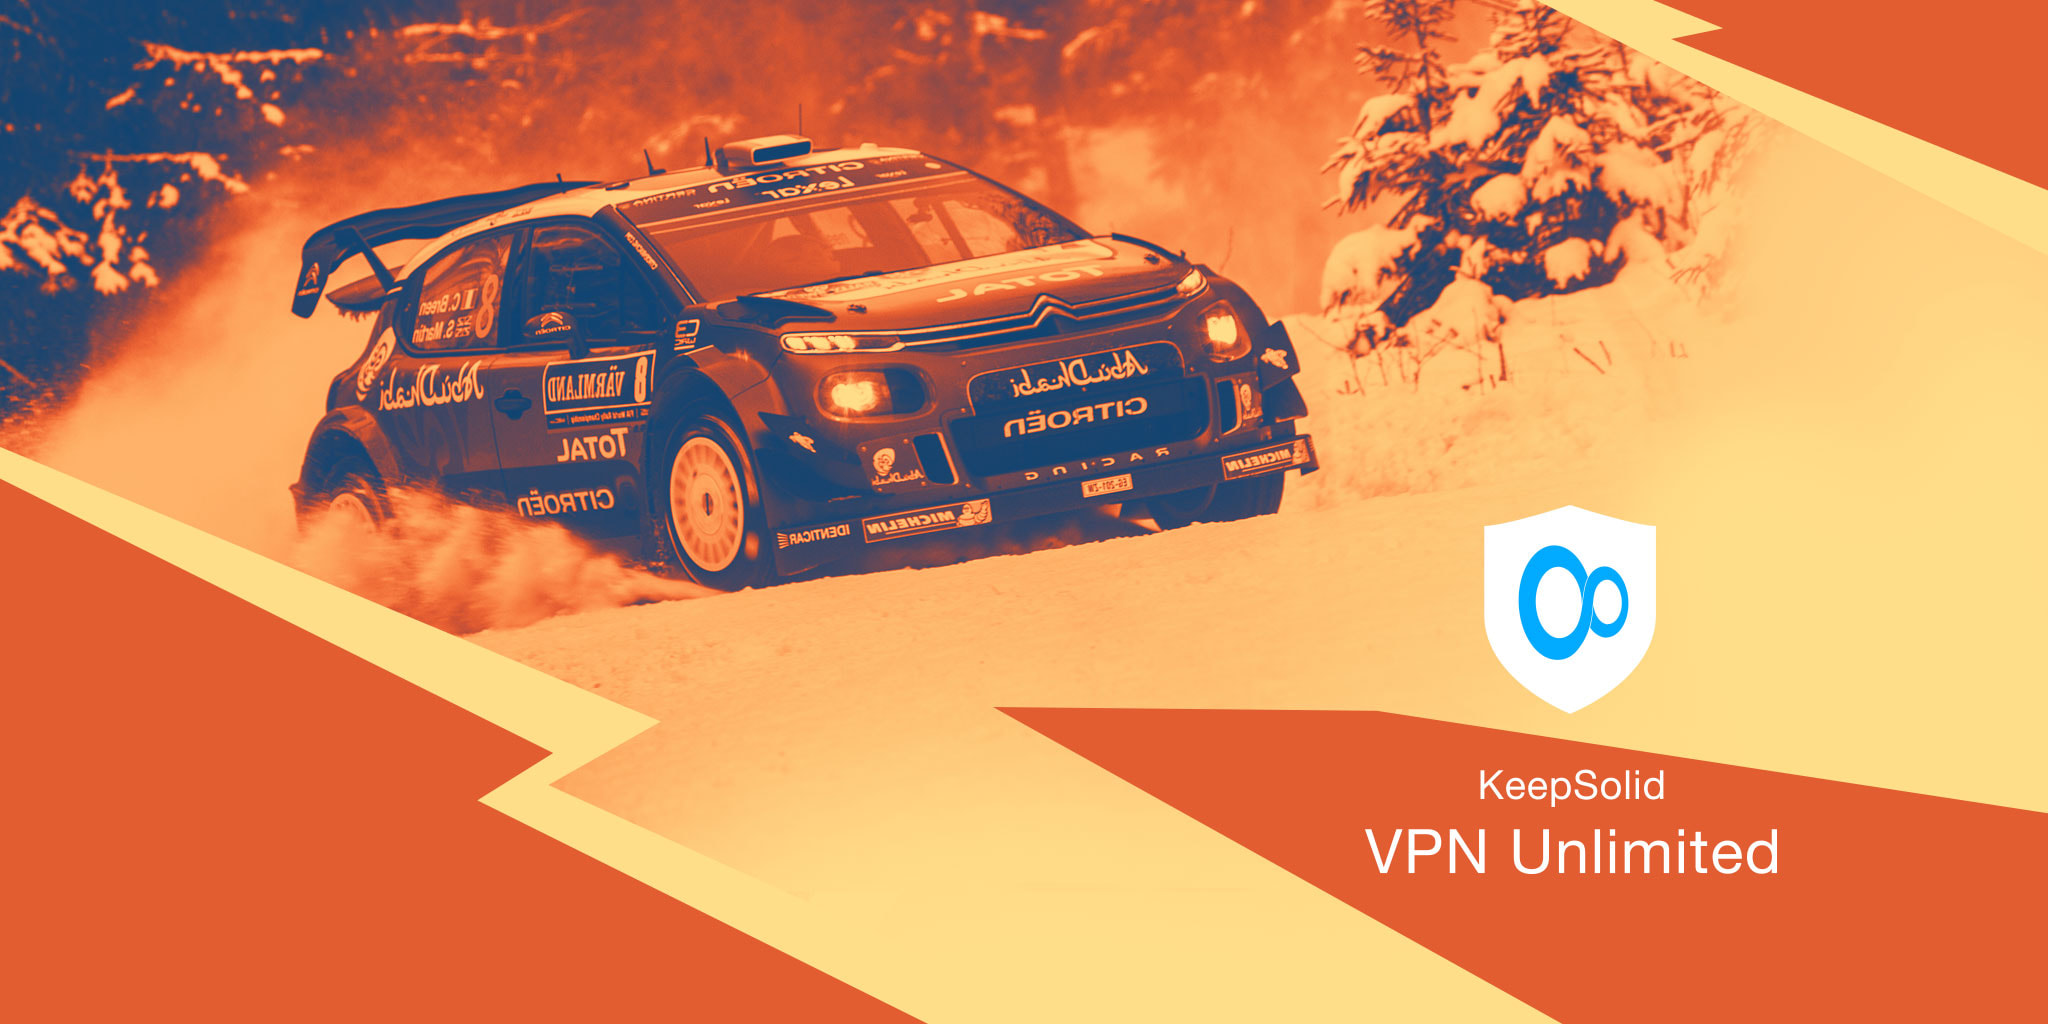 Craig Breen with his Citroen WRC car during the event Rally Sweden. Learn how to watch World Rally Championship Live